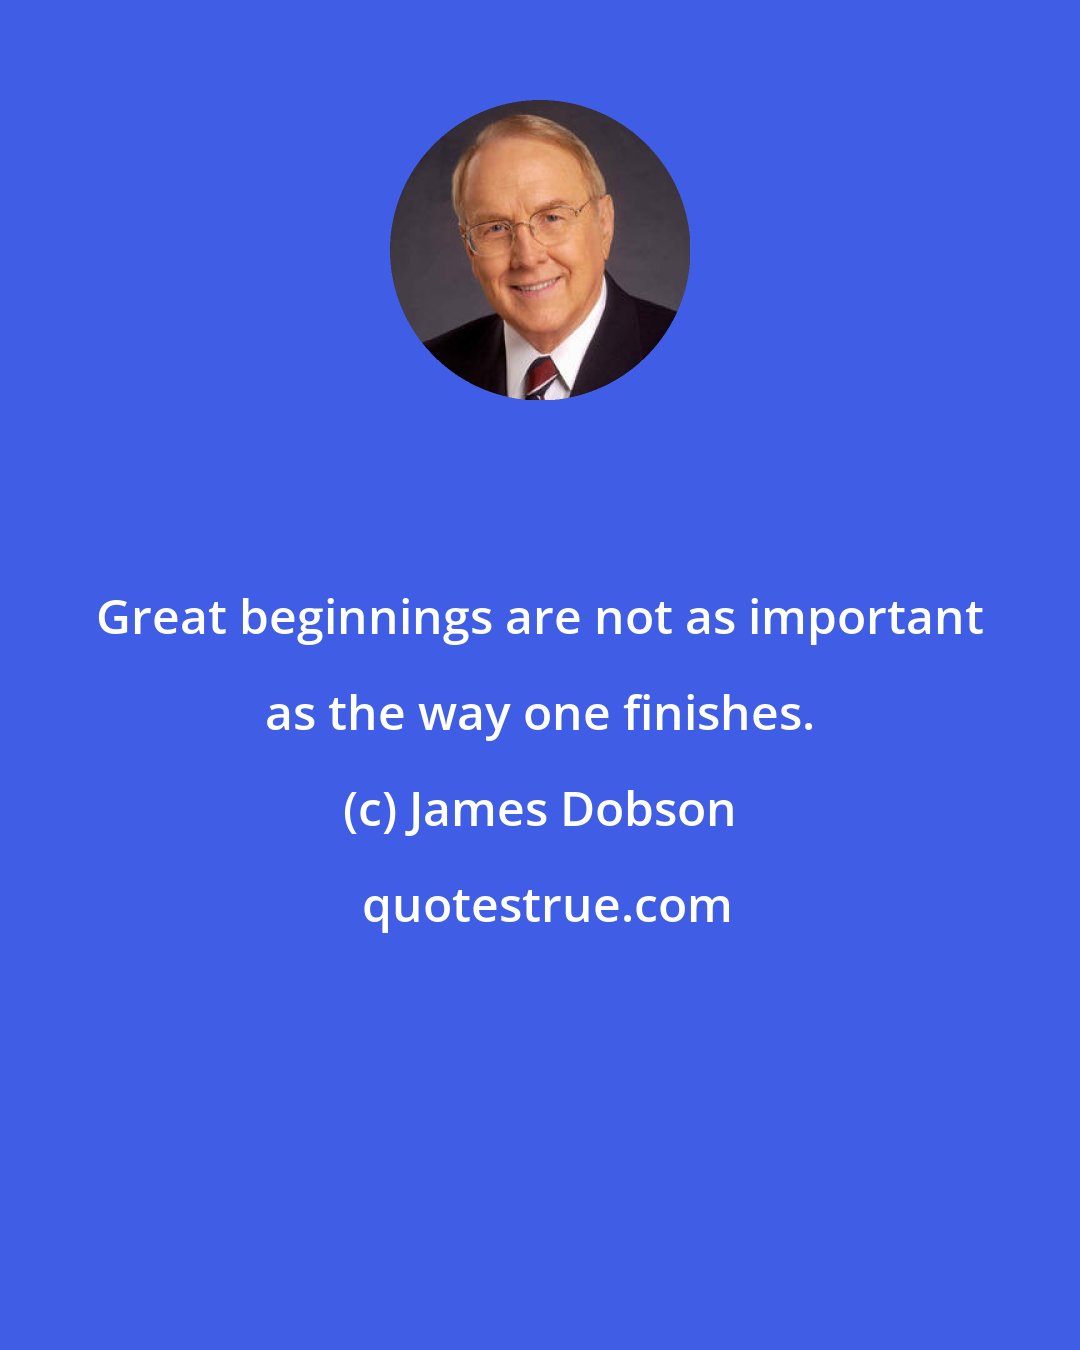 James Dobson: Great beginnings are not as important as the way one finishes.